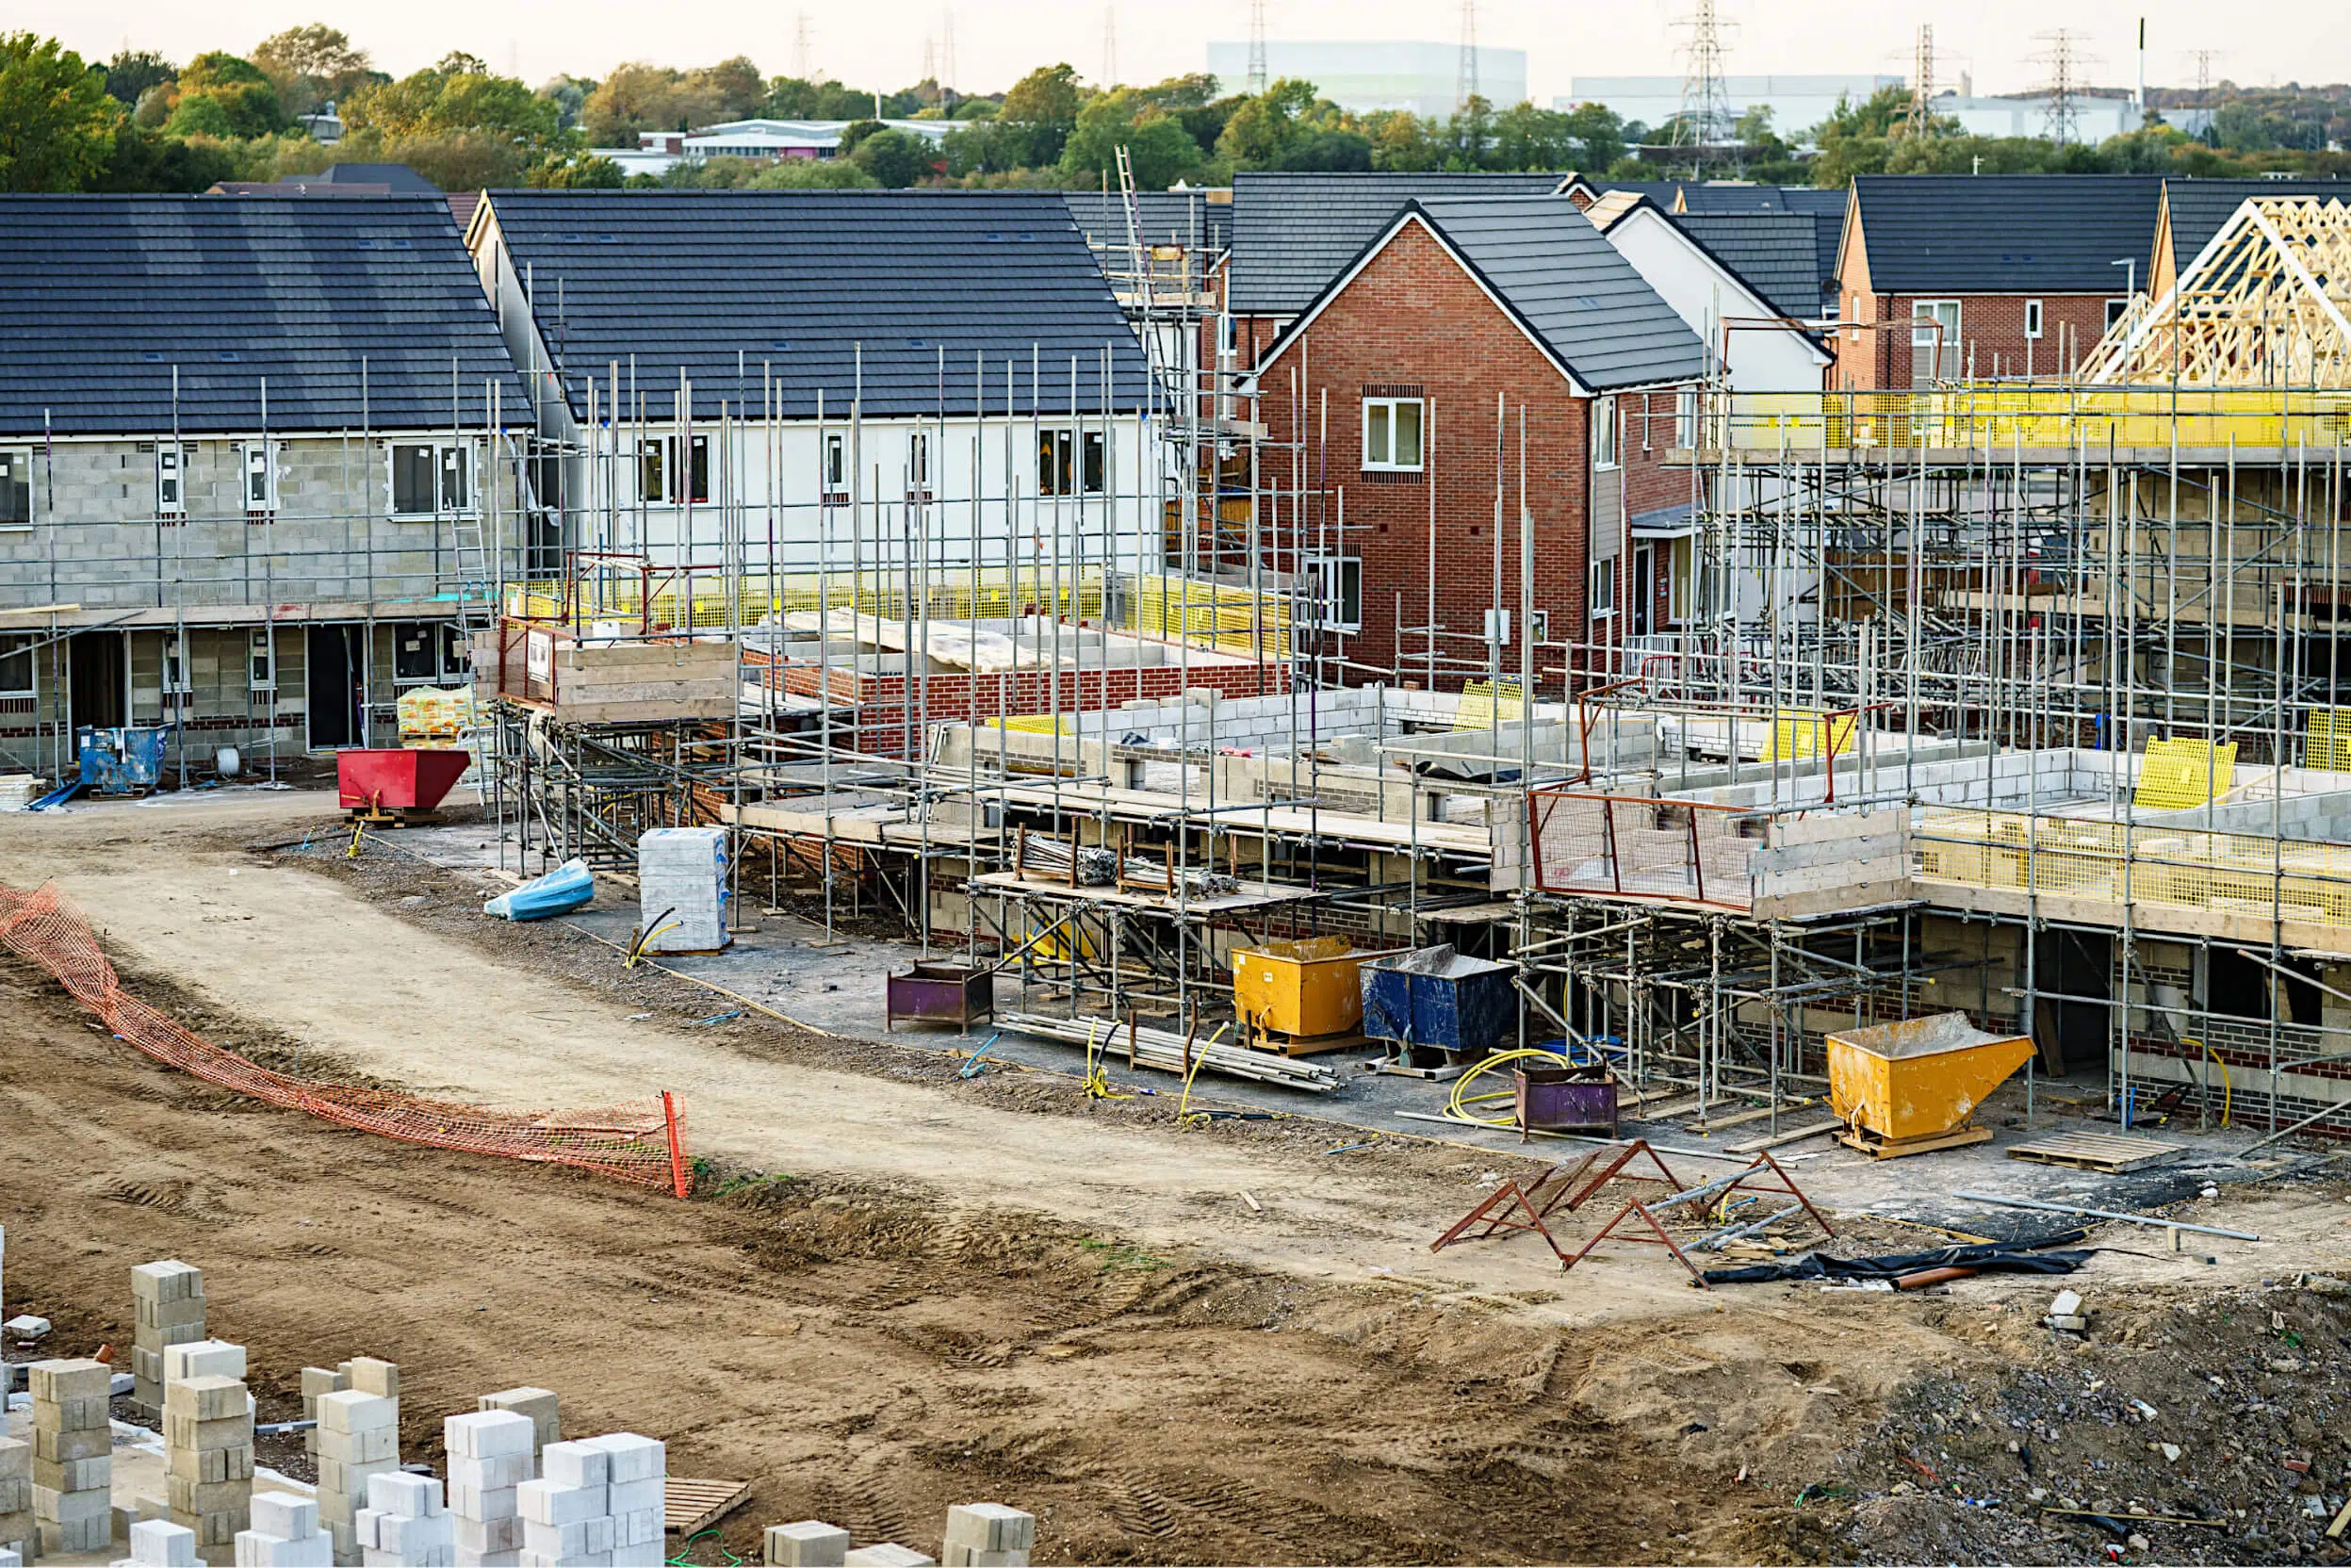 New build houses being built for website tinyjpg